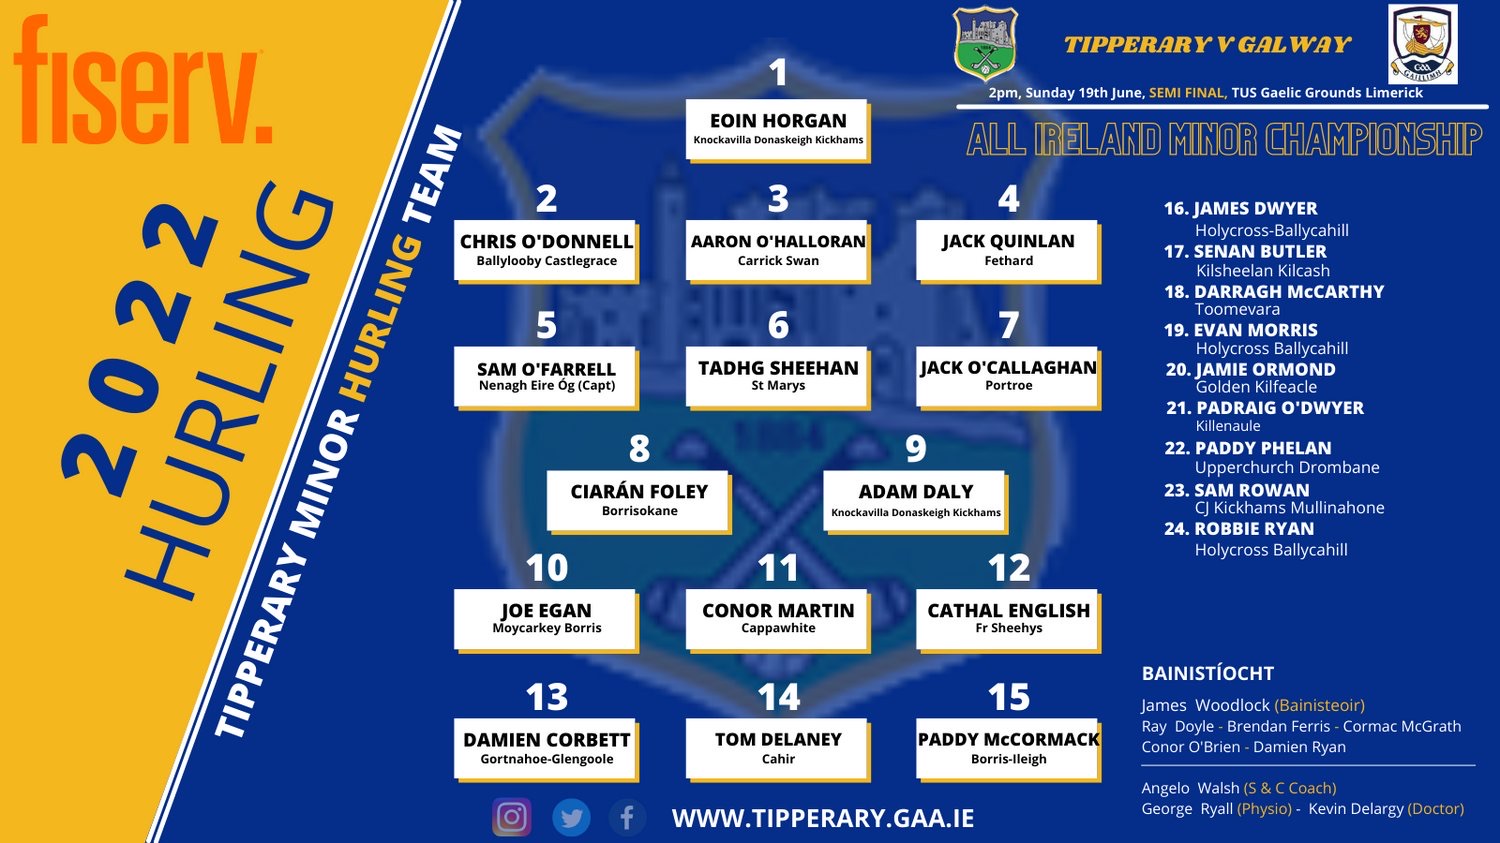 Photo from Tipperary GAA.